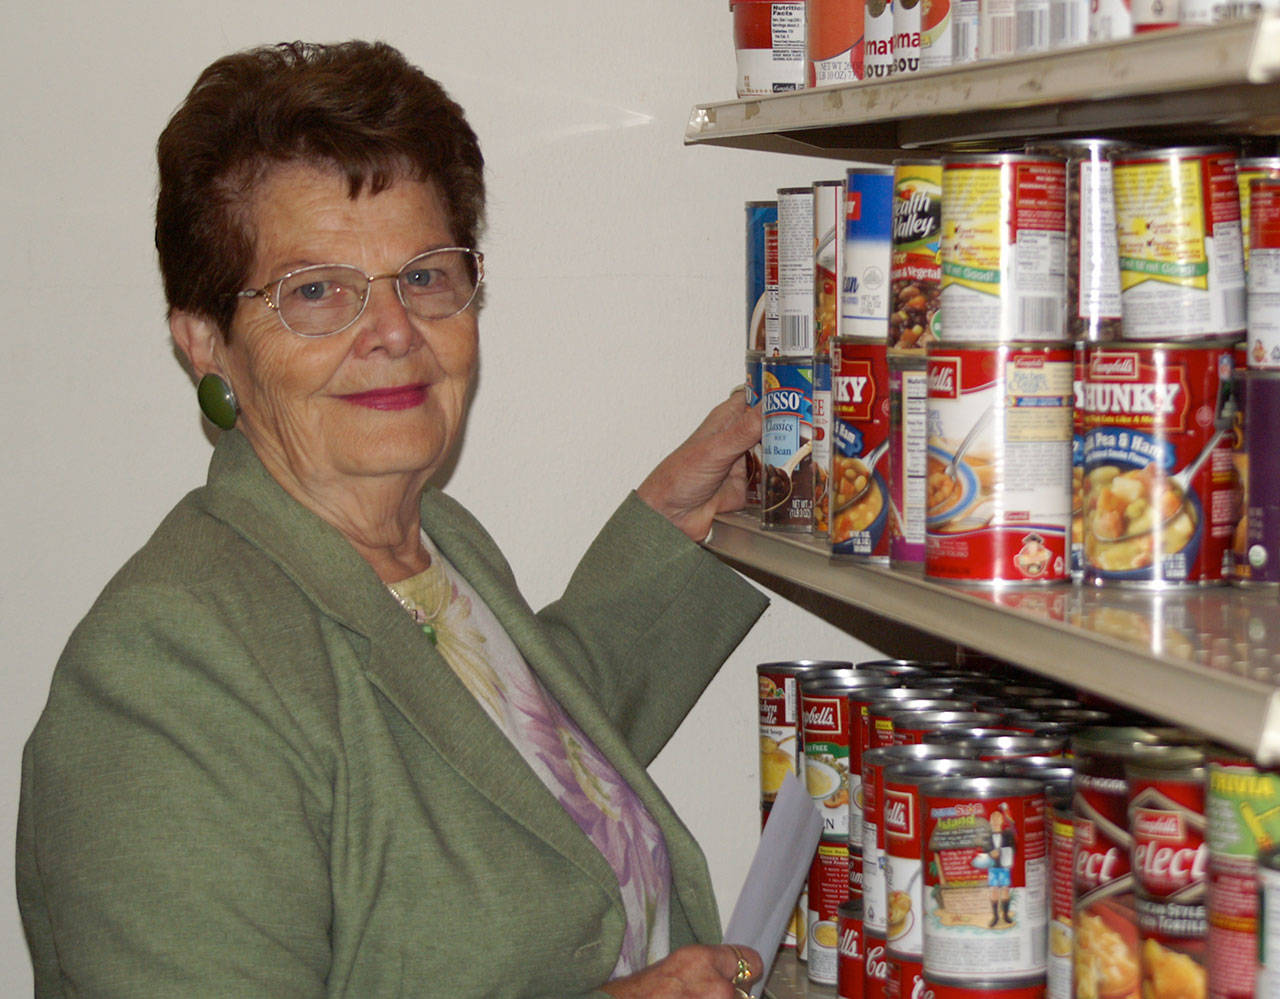 In 1992, Nina Fatherson was named Sequim Citizen of the Year for her dedication to those in need through the Sequim Food Bank. She recently died after a struggle with cancer. (Olympic Peninsula News Group file)